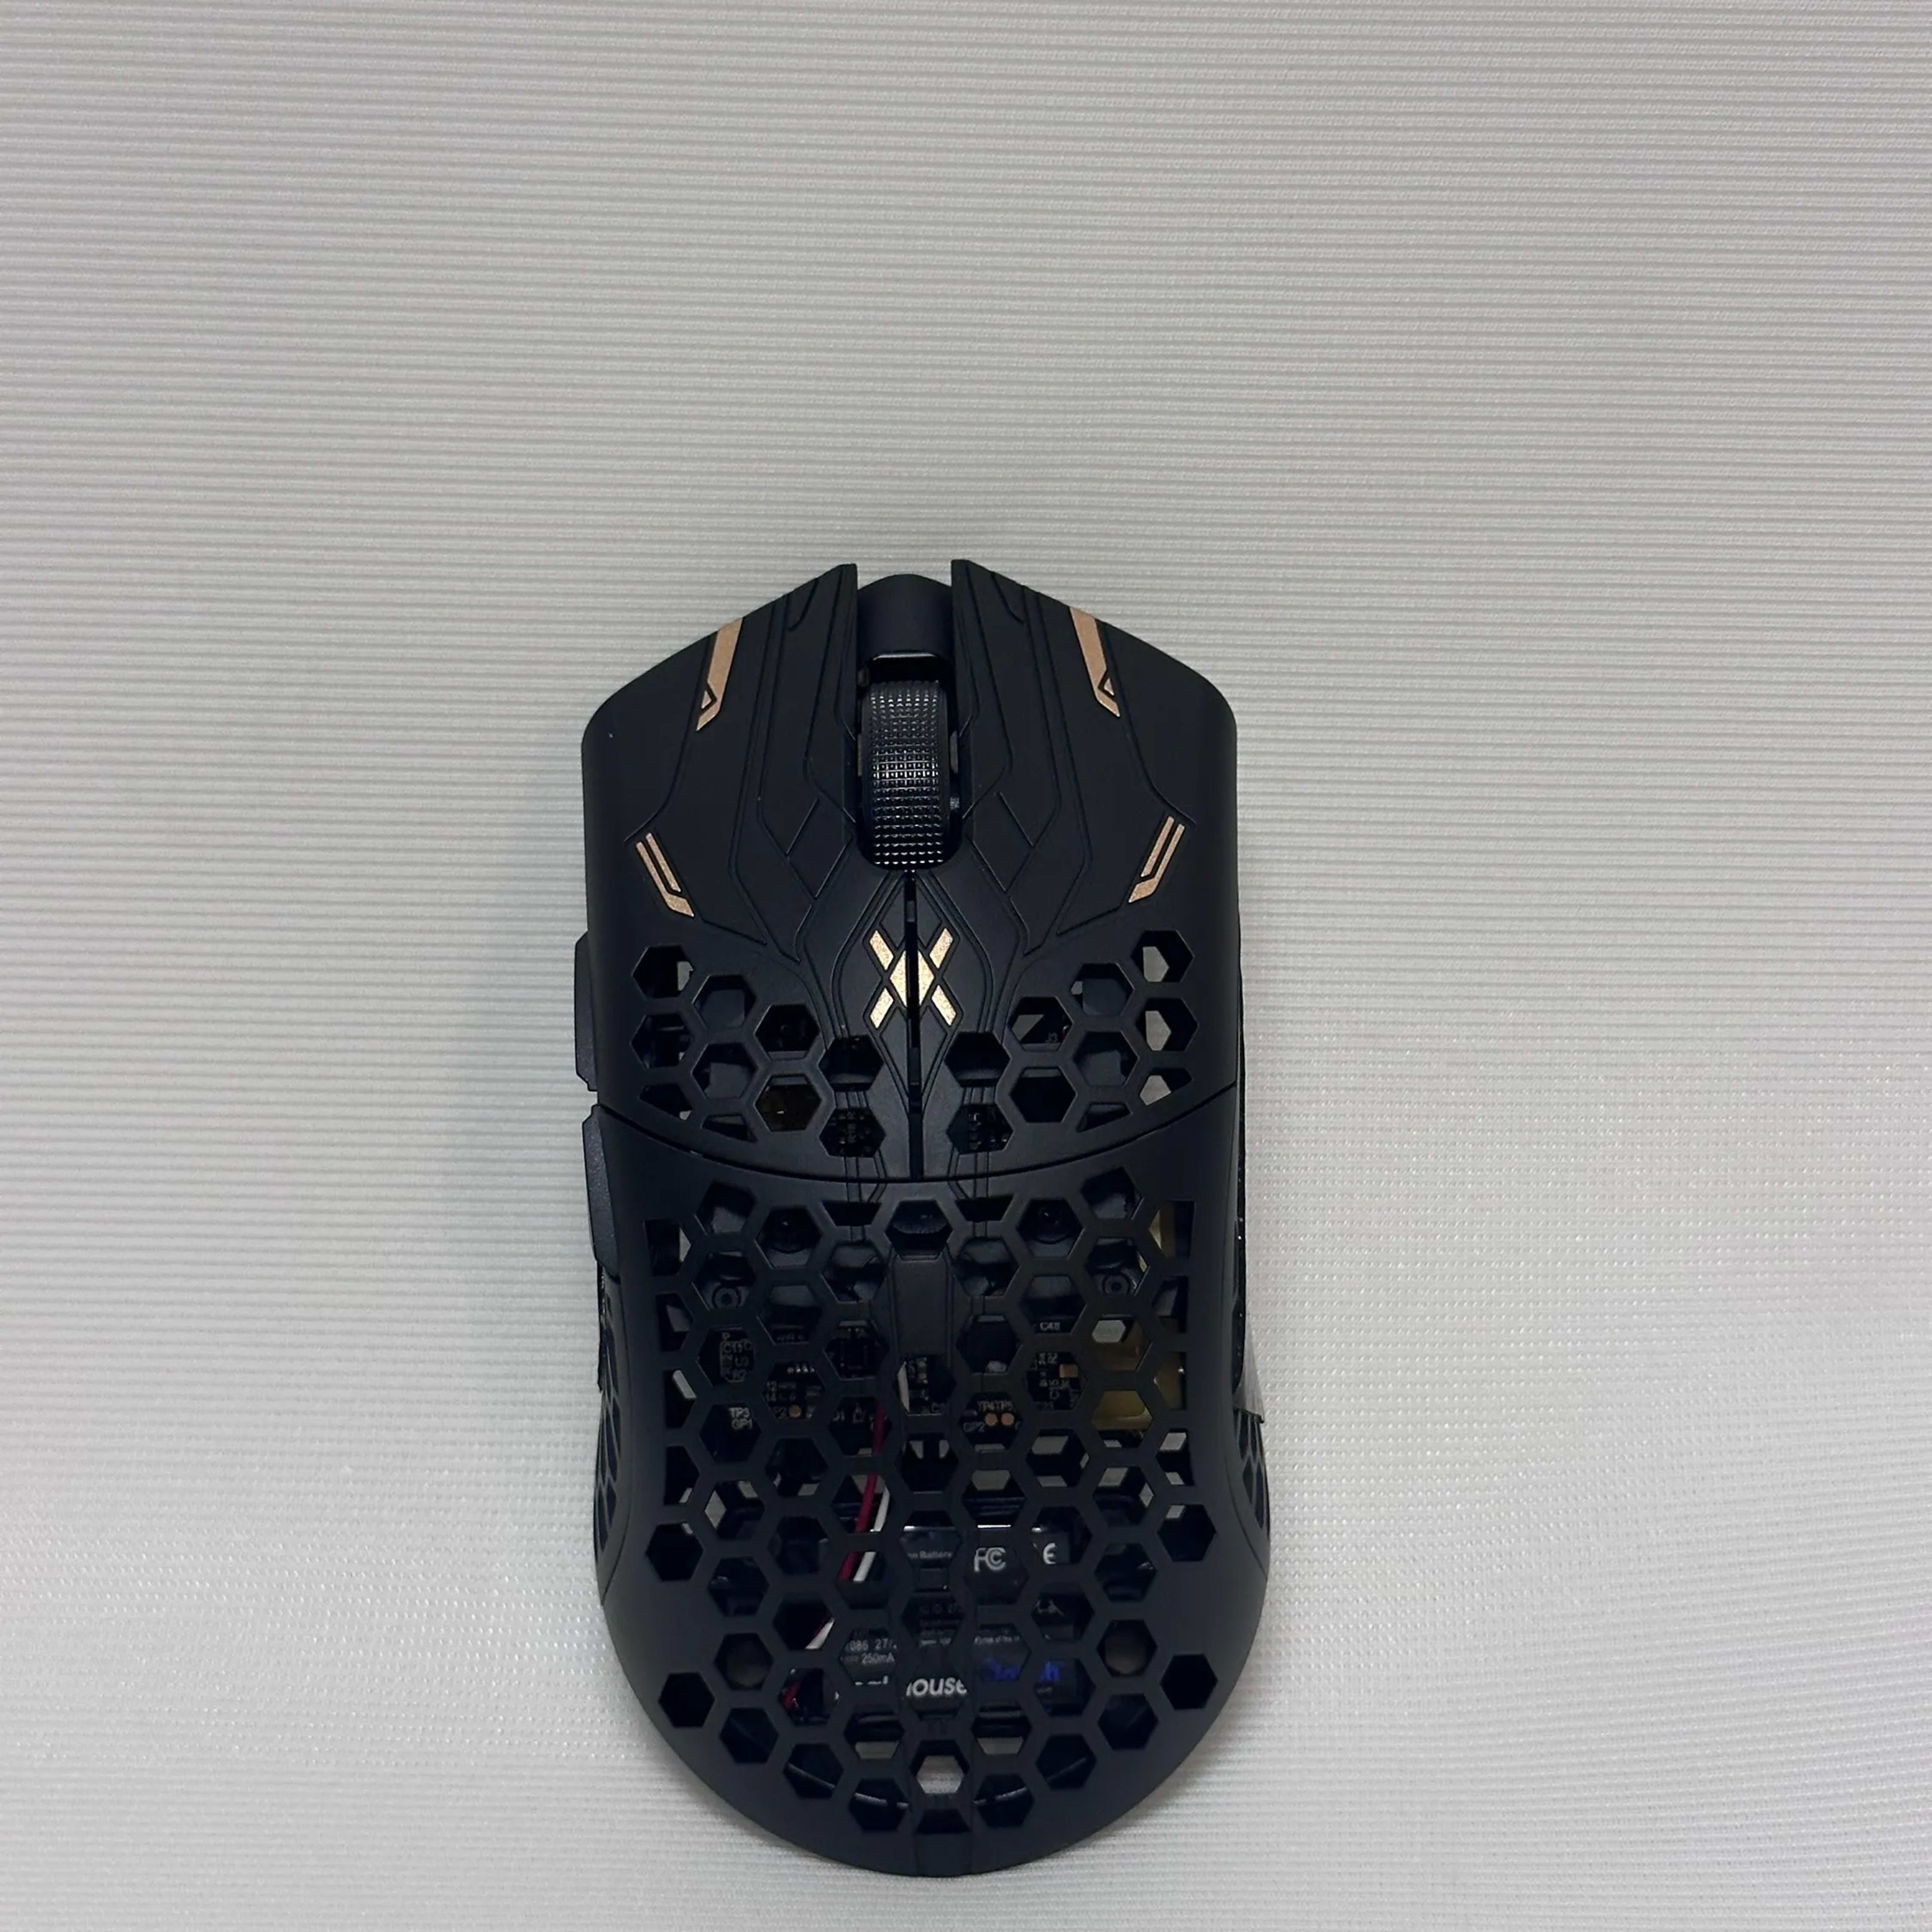 Finalmouse Ultralight X Guardian TigerFinalmouseUlt